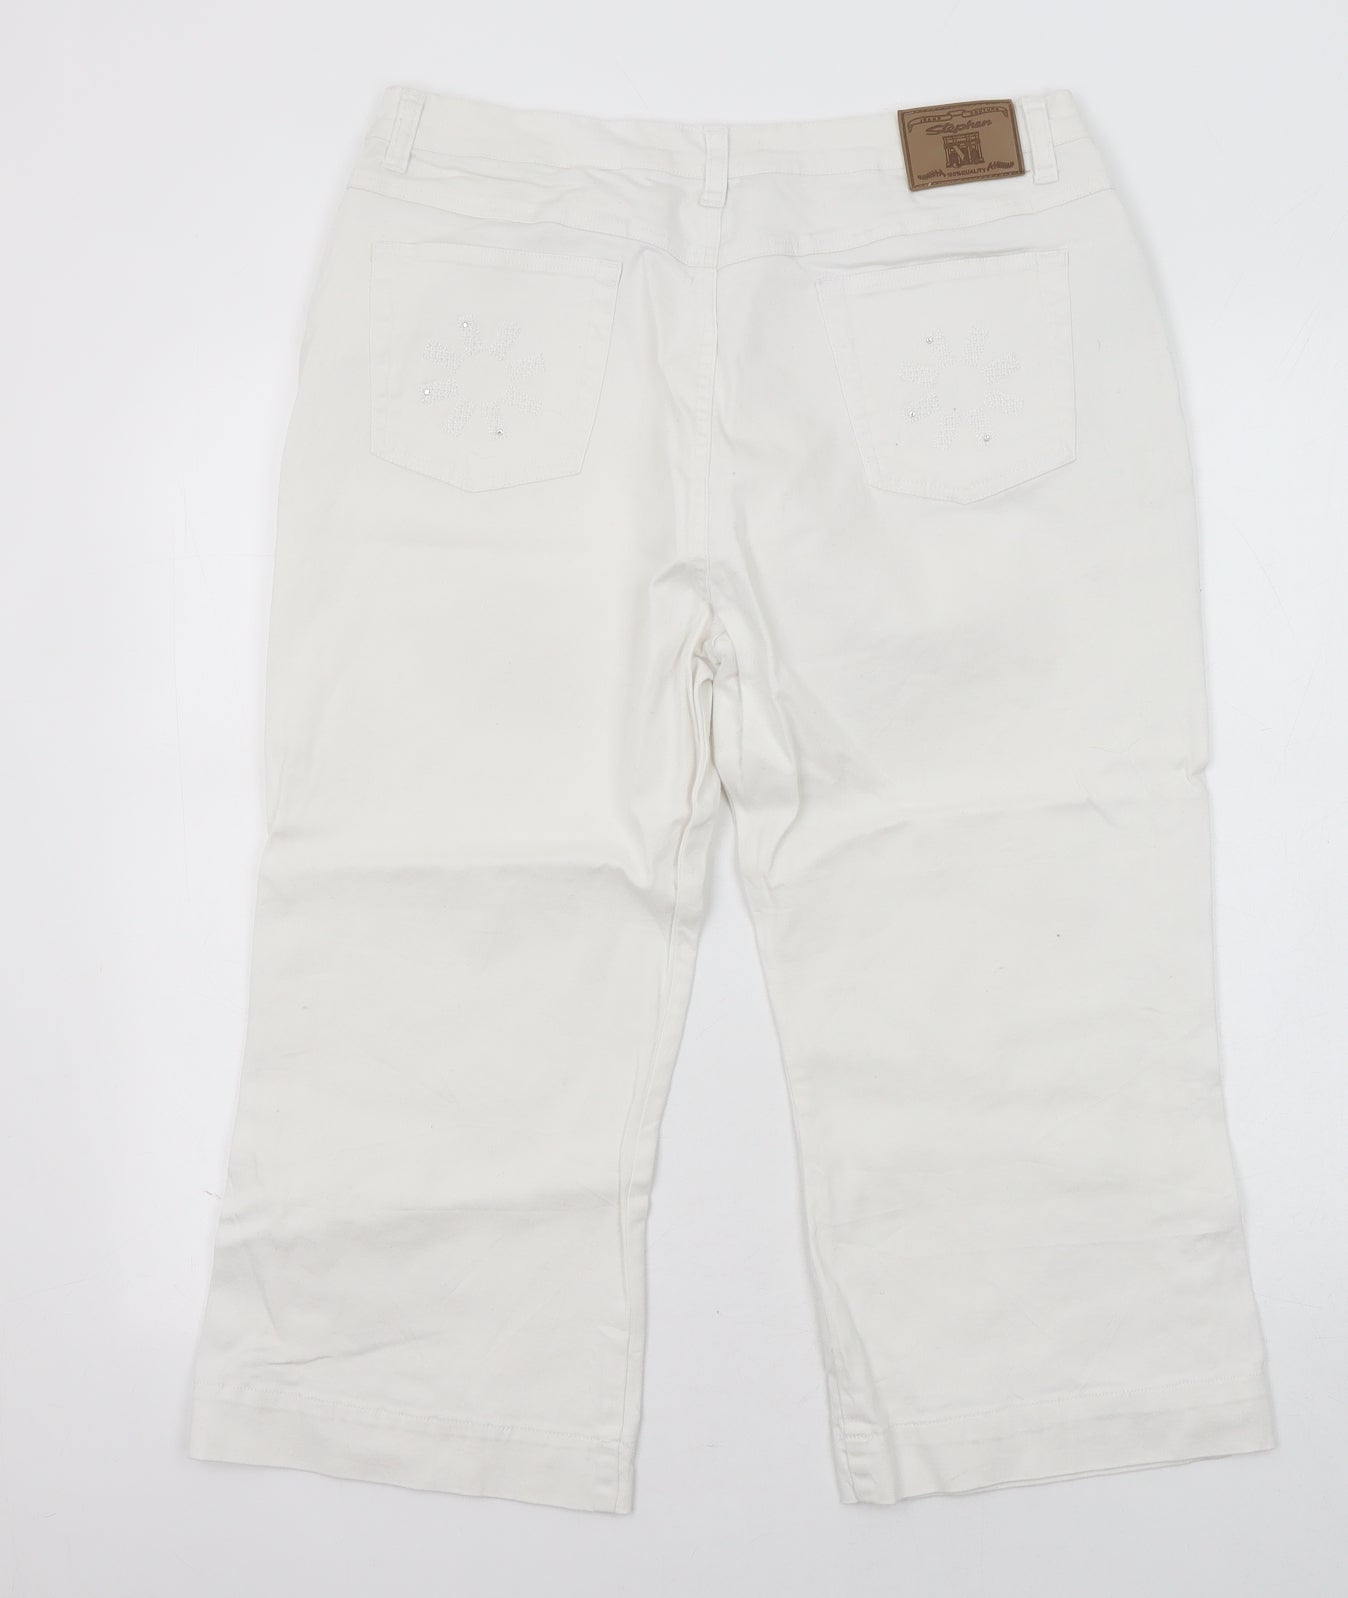 Stephen Womens White Cotton Cropped Jeans Size 30 in Regular Zip